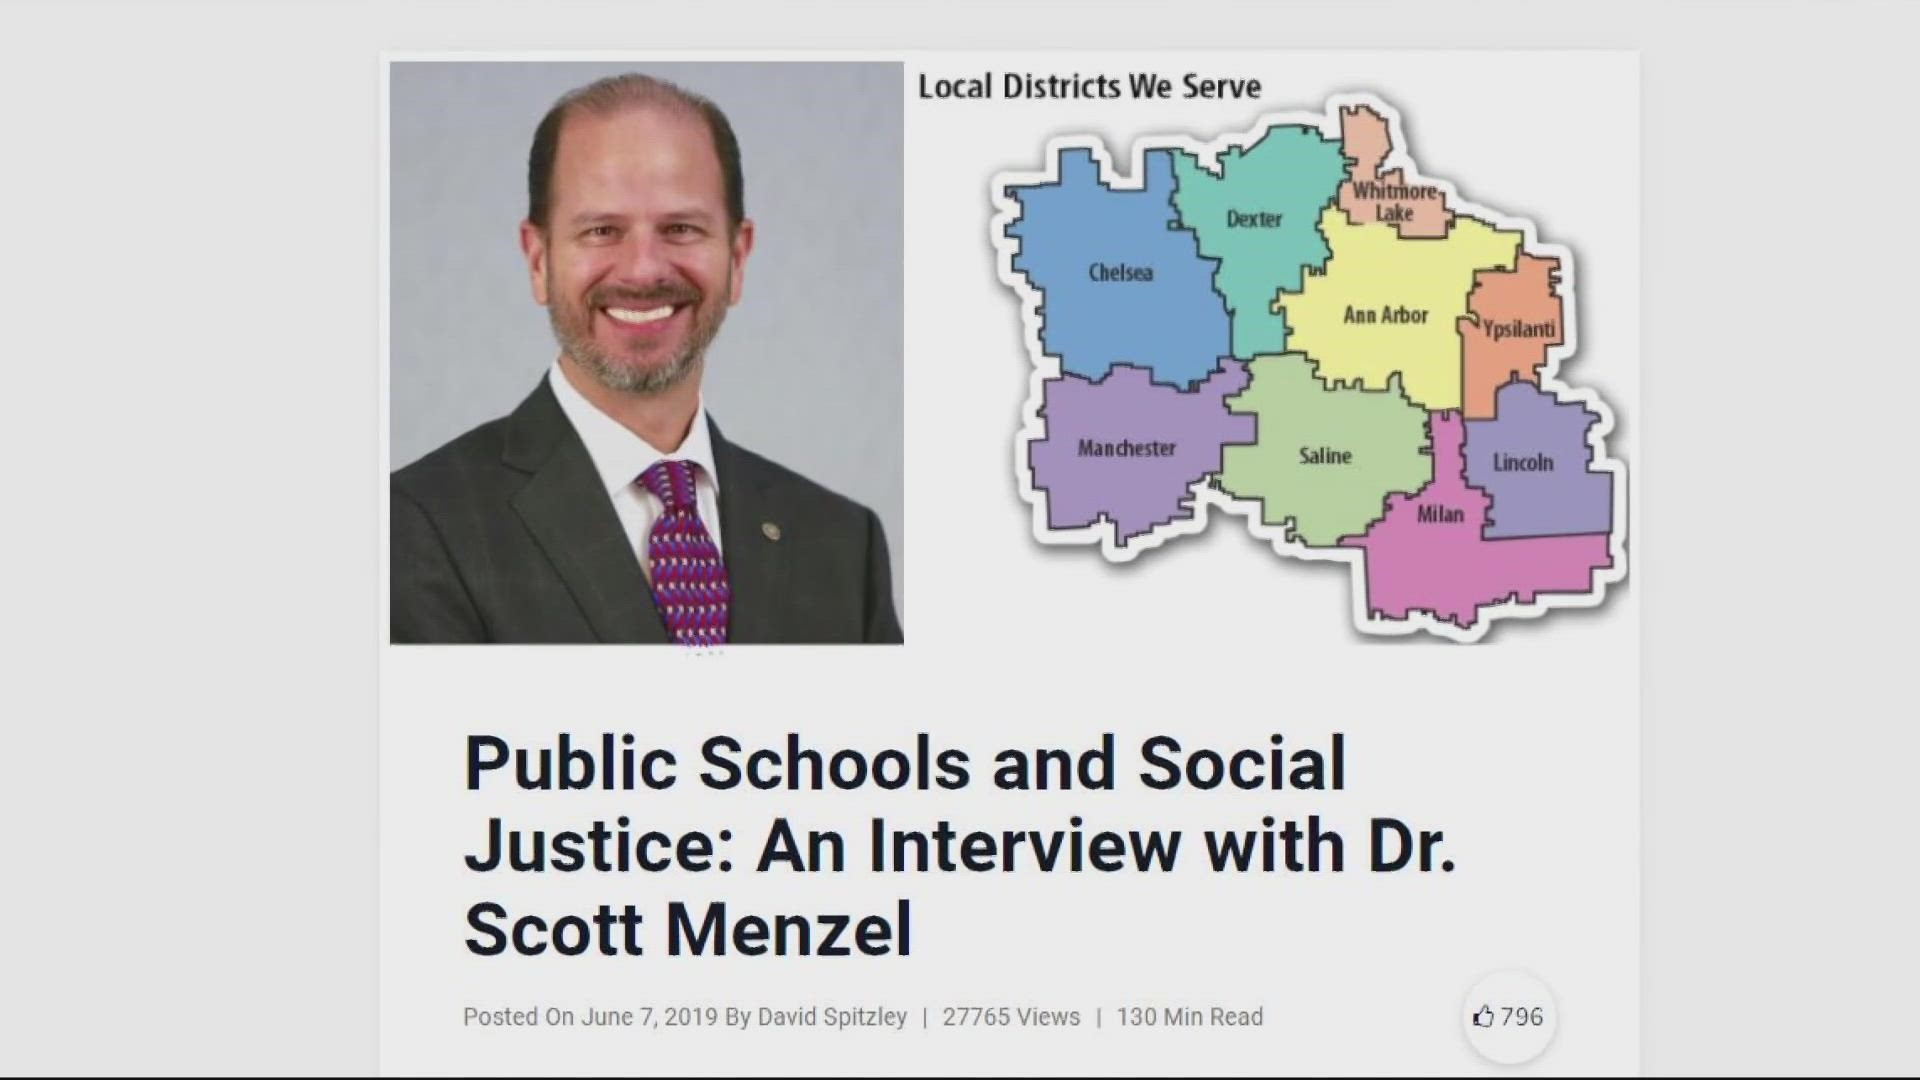 Dr. Menzel received backlash after his 2019 comments resurfaced, where he called for deeper discussions on racial equity in education.